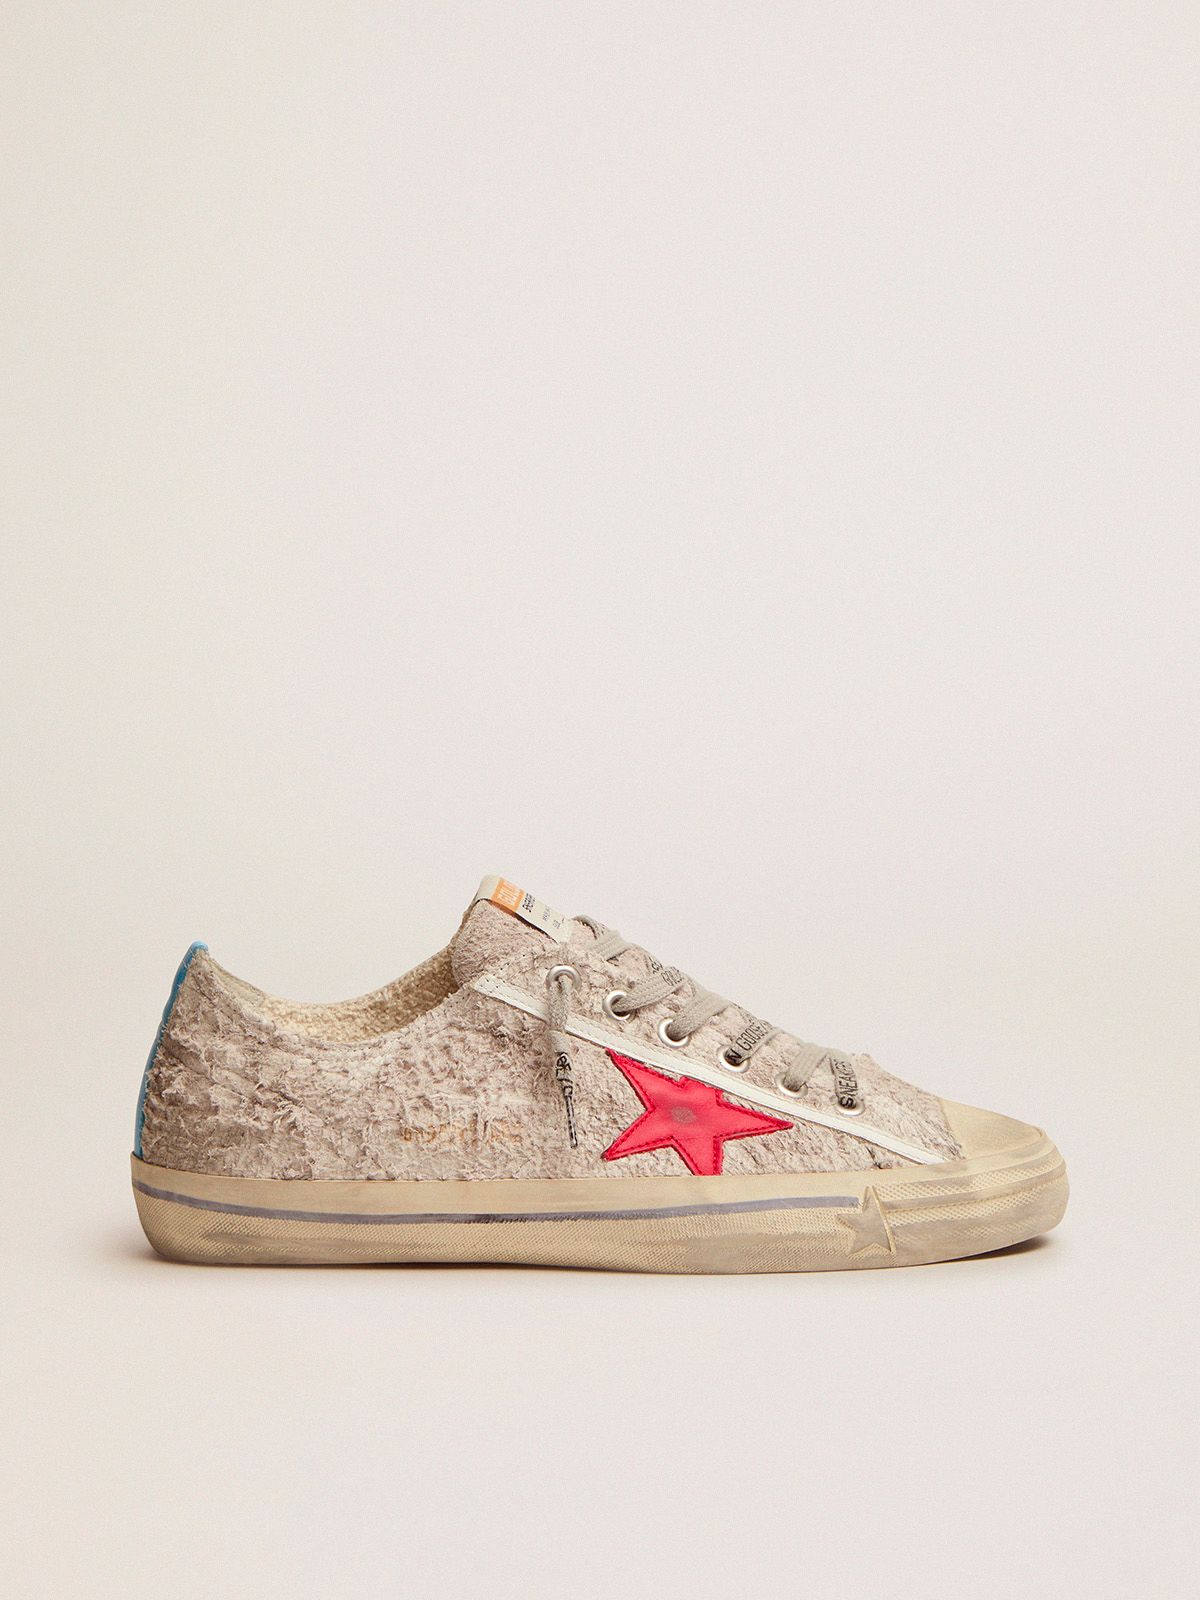 V-Star sneakers in white suede with red leather star